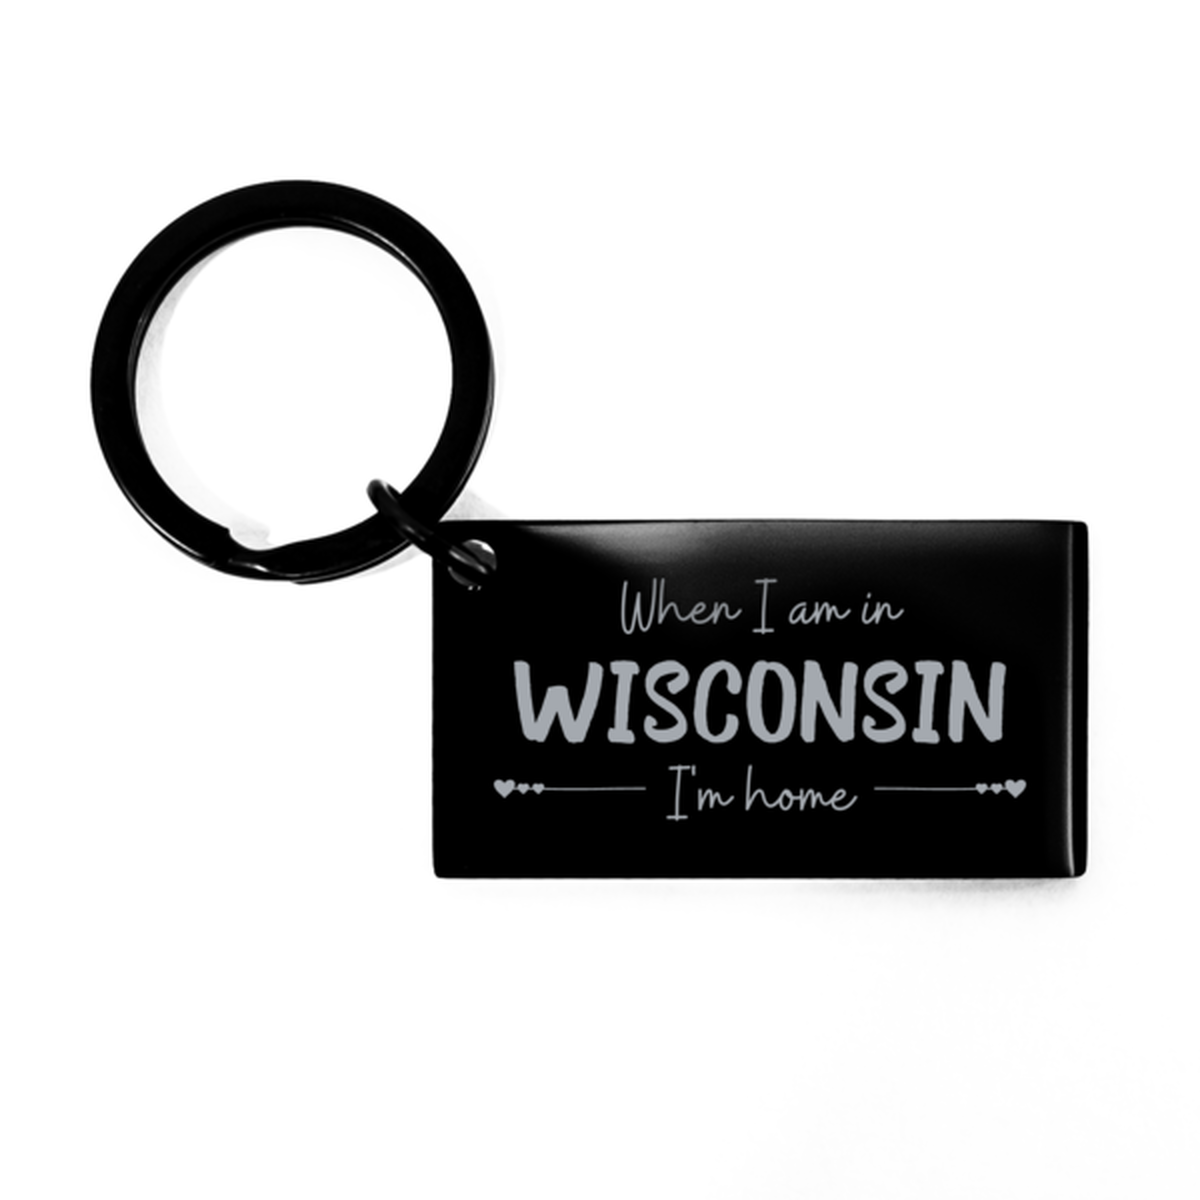 When I am in Wisconsin I'm home Keychain, Cheap Gifts For Wisconsin, State Wisconsin Birthday Gifts for Friends Coworker